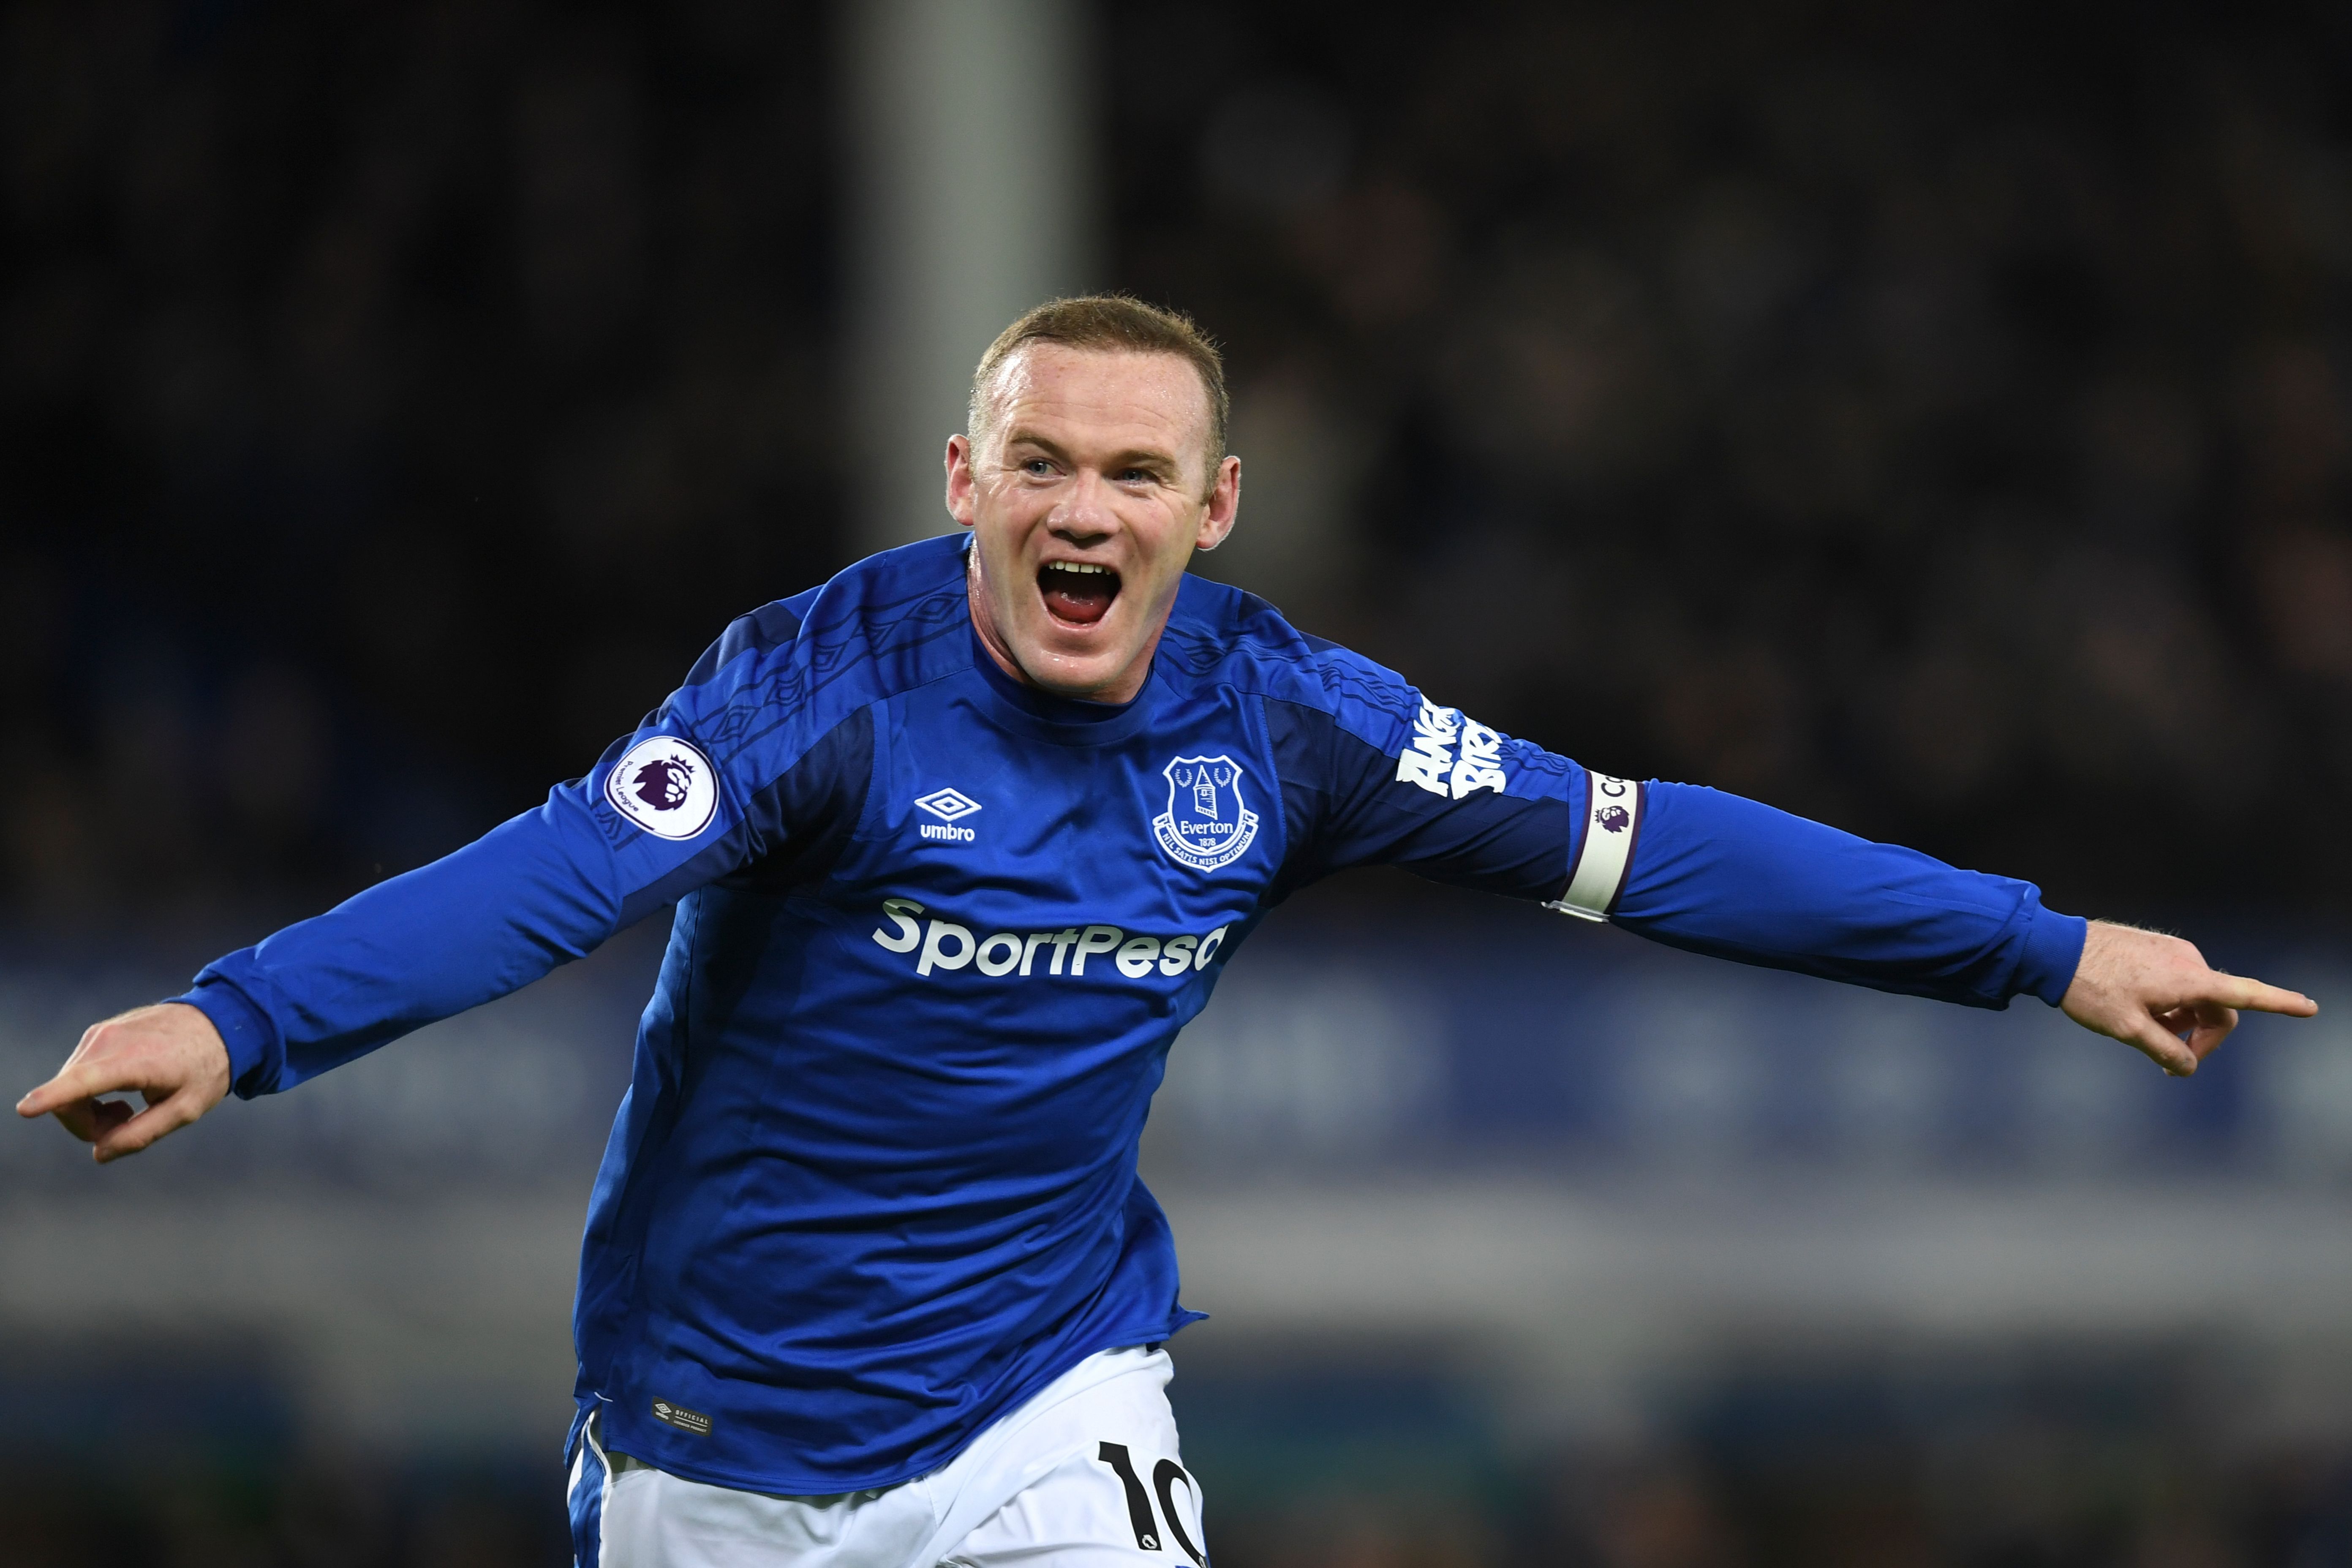 Everton's English striker Wayne Rooney celebrates scoring their second goal during the English Premier League football match between Everton and West Ham United at Goodison Park in Liverpool, north west England on November 29, 2017. / AFP PHOTO / Paul ELLIS / RESTRICTED TO EDITORIAL USE. No use with unauthorized audio, video, data, fixture lists, club/league logos or 'live' services. Online in-match use limited to 75 images, no video emulation. No use in betting, games or single club/league/player publications.  /         (Photo credit should read PAUL ELLIS/AFP/Getty Images)